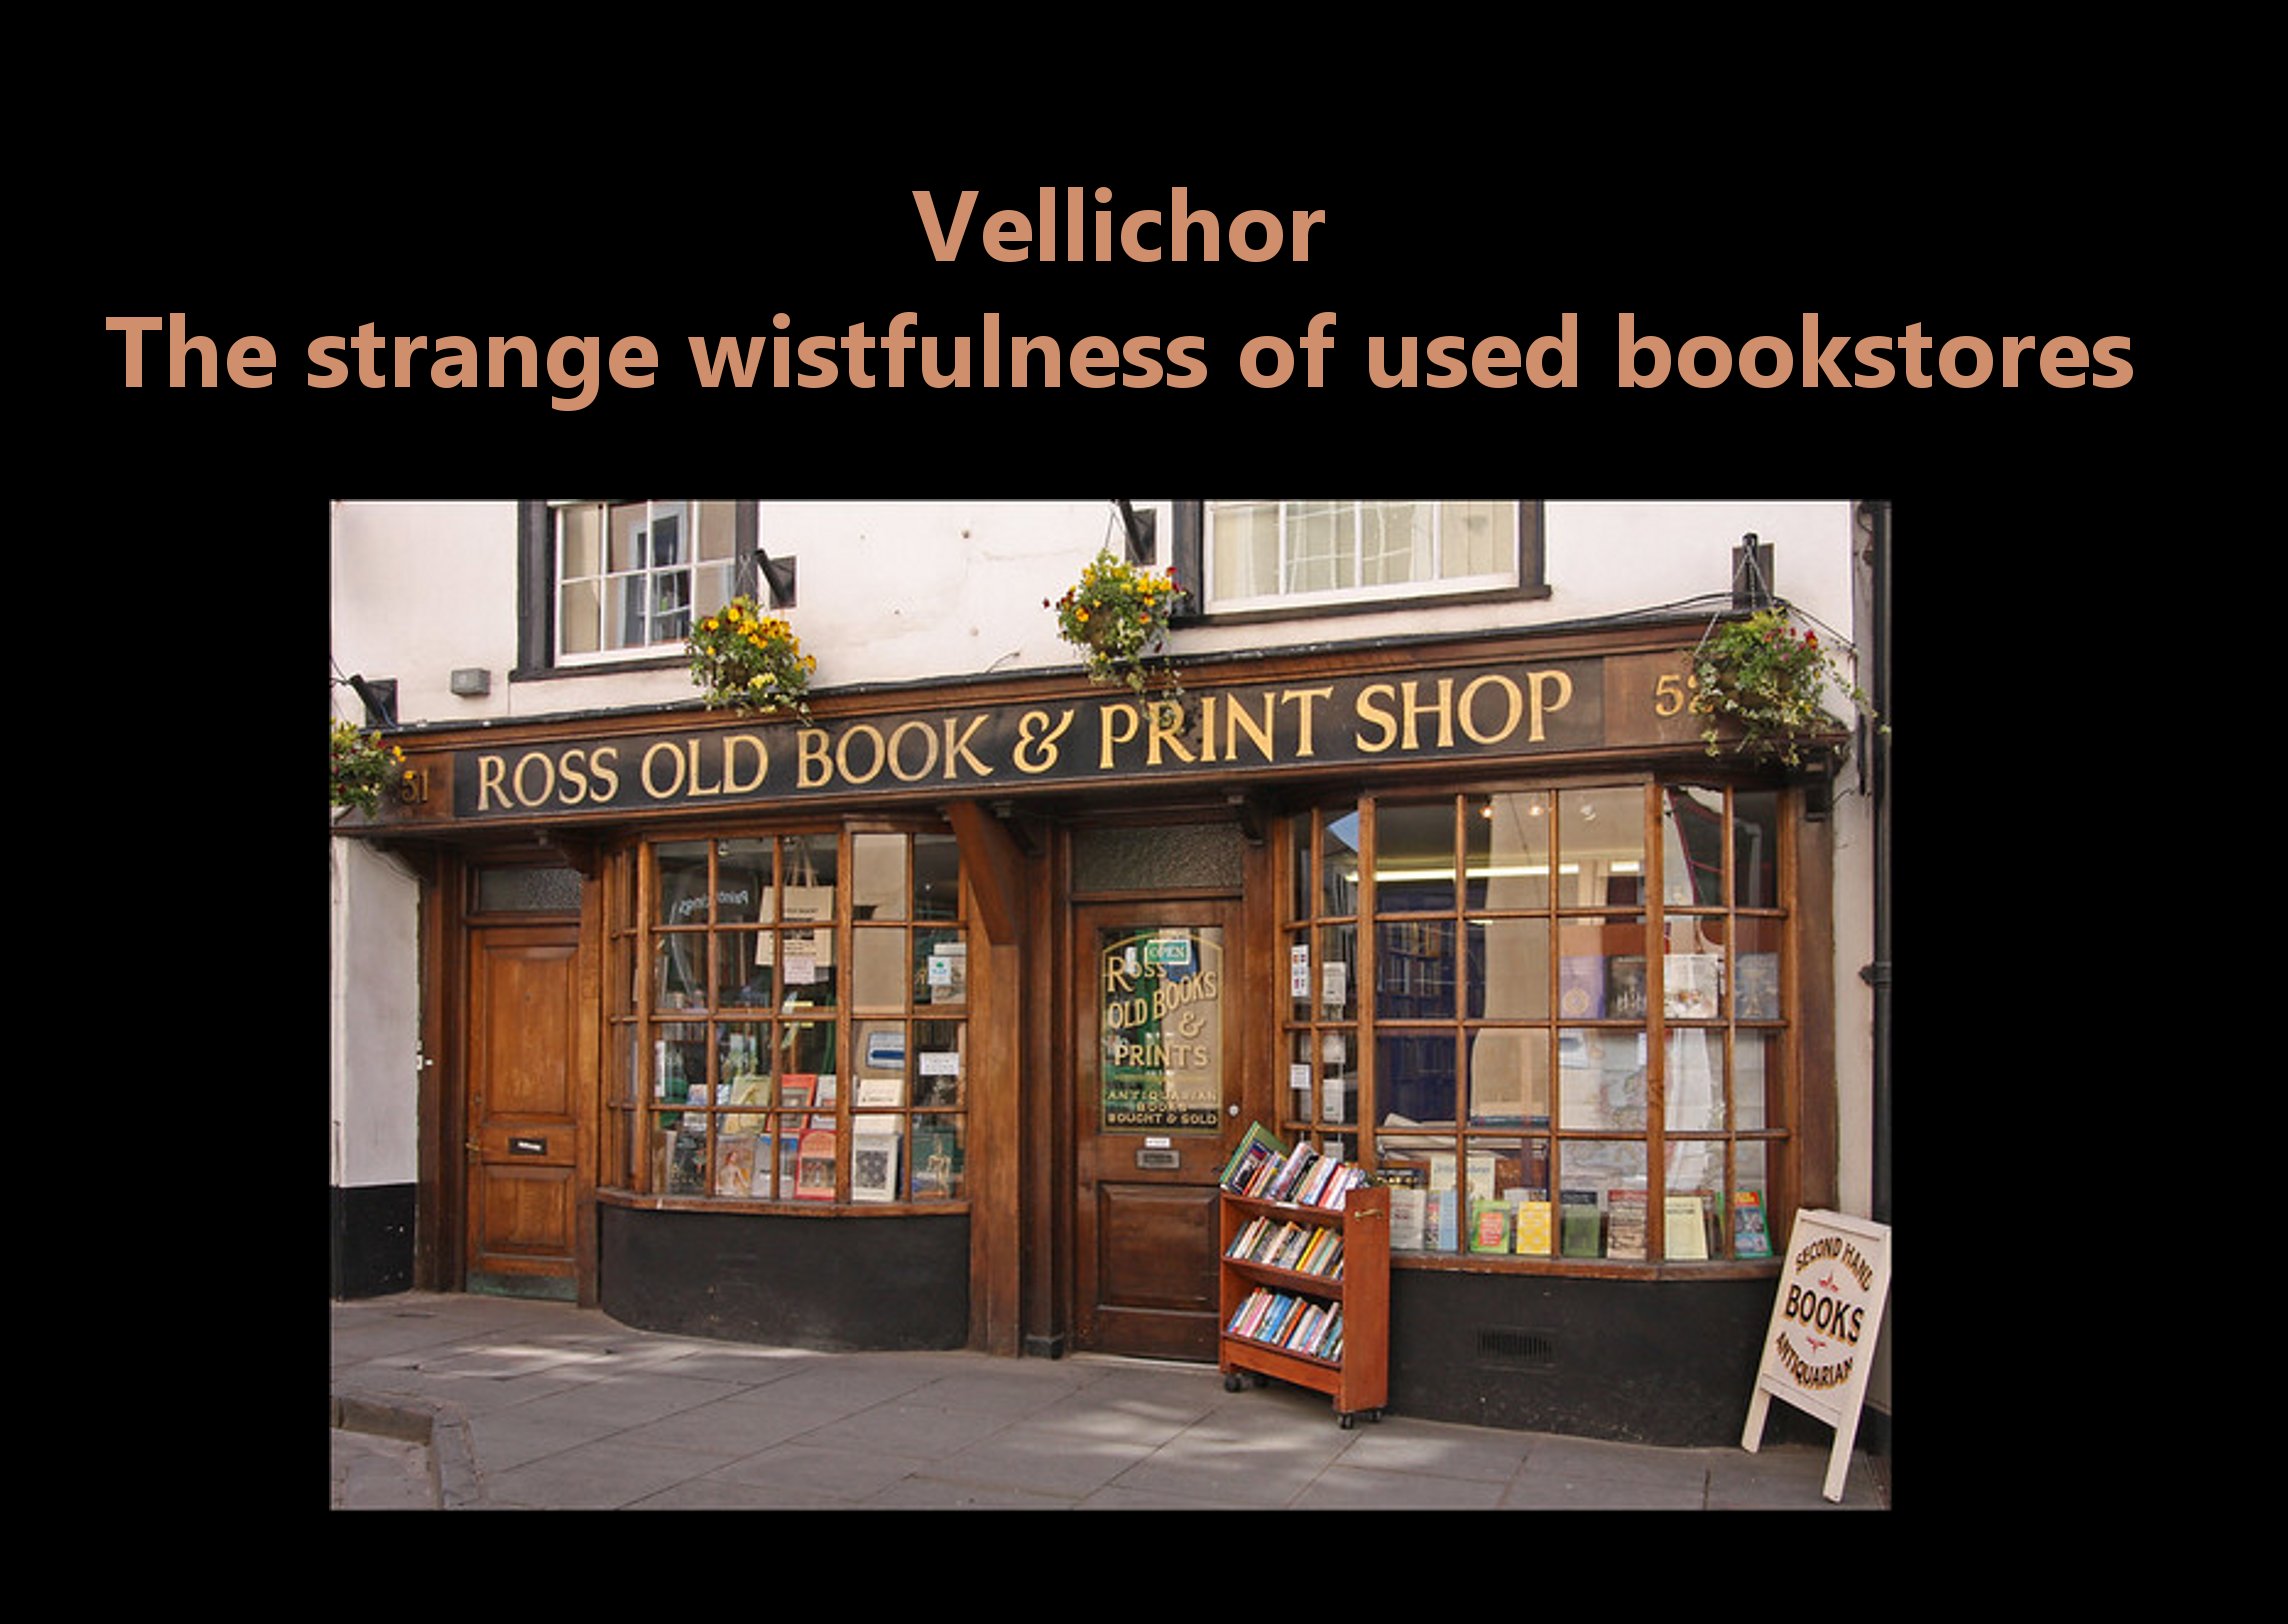 facade - Vellichor The strange wistfulness of used bookstores Ross Old Book & Print Shop 58 song Old Books Prints Anter Jaar Boucht Sold Books